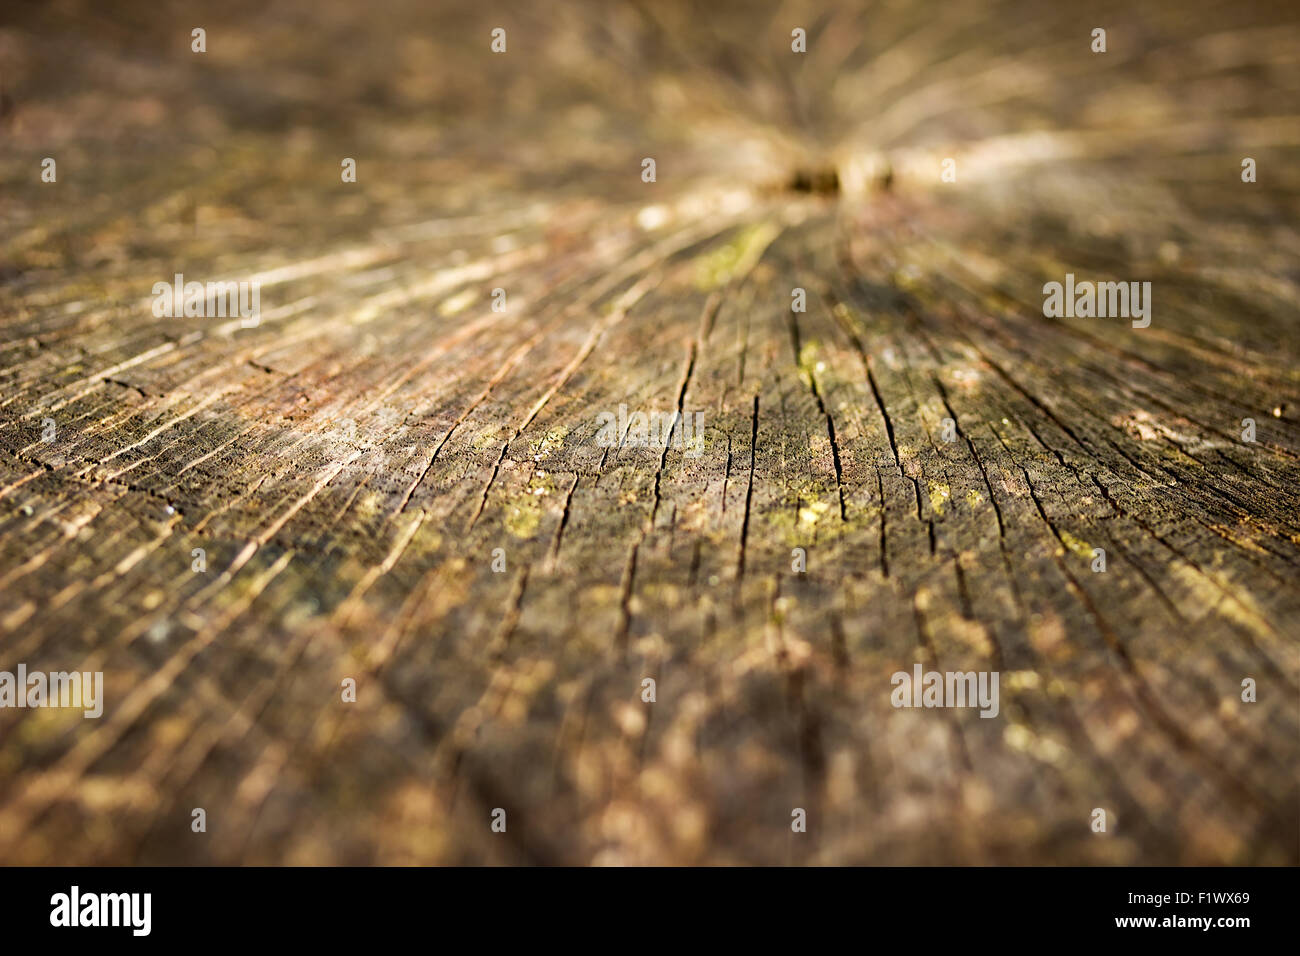 texture wood cut wooden close up tree core trunk background pattern old nature white circle material ring slice stump view Stock Photo